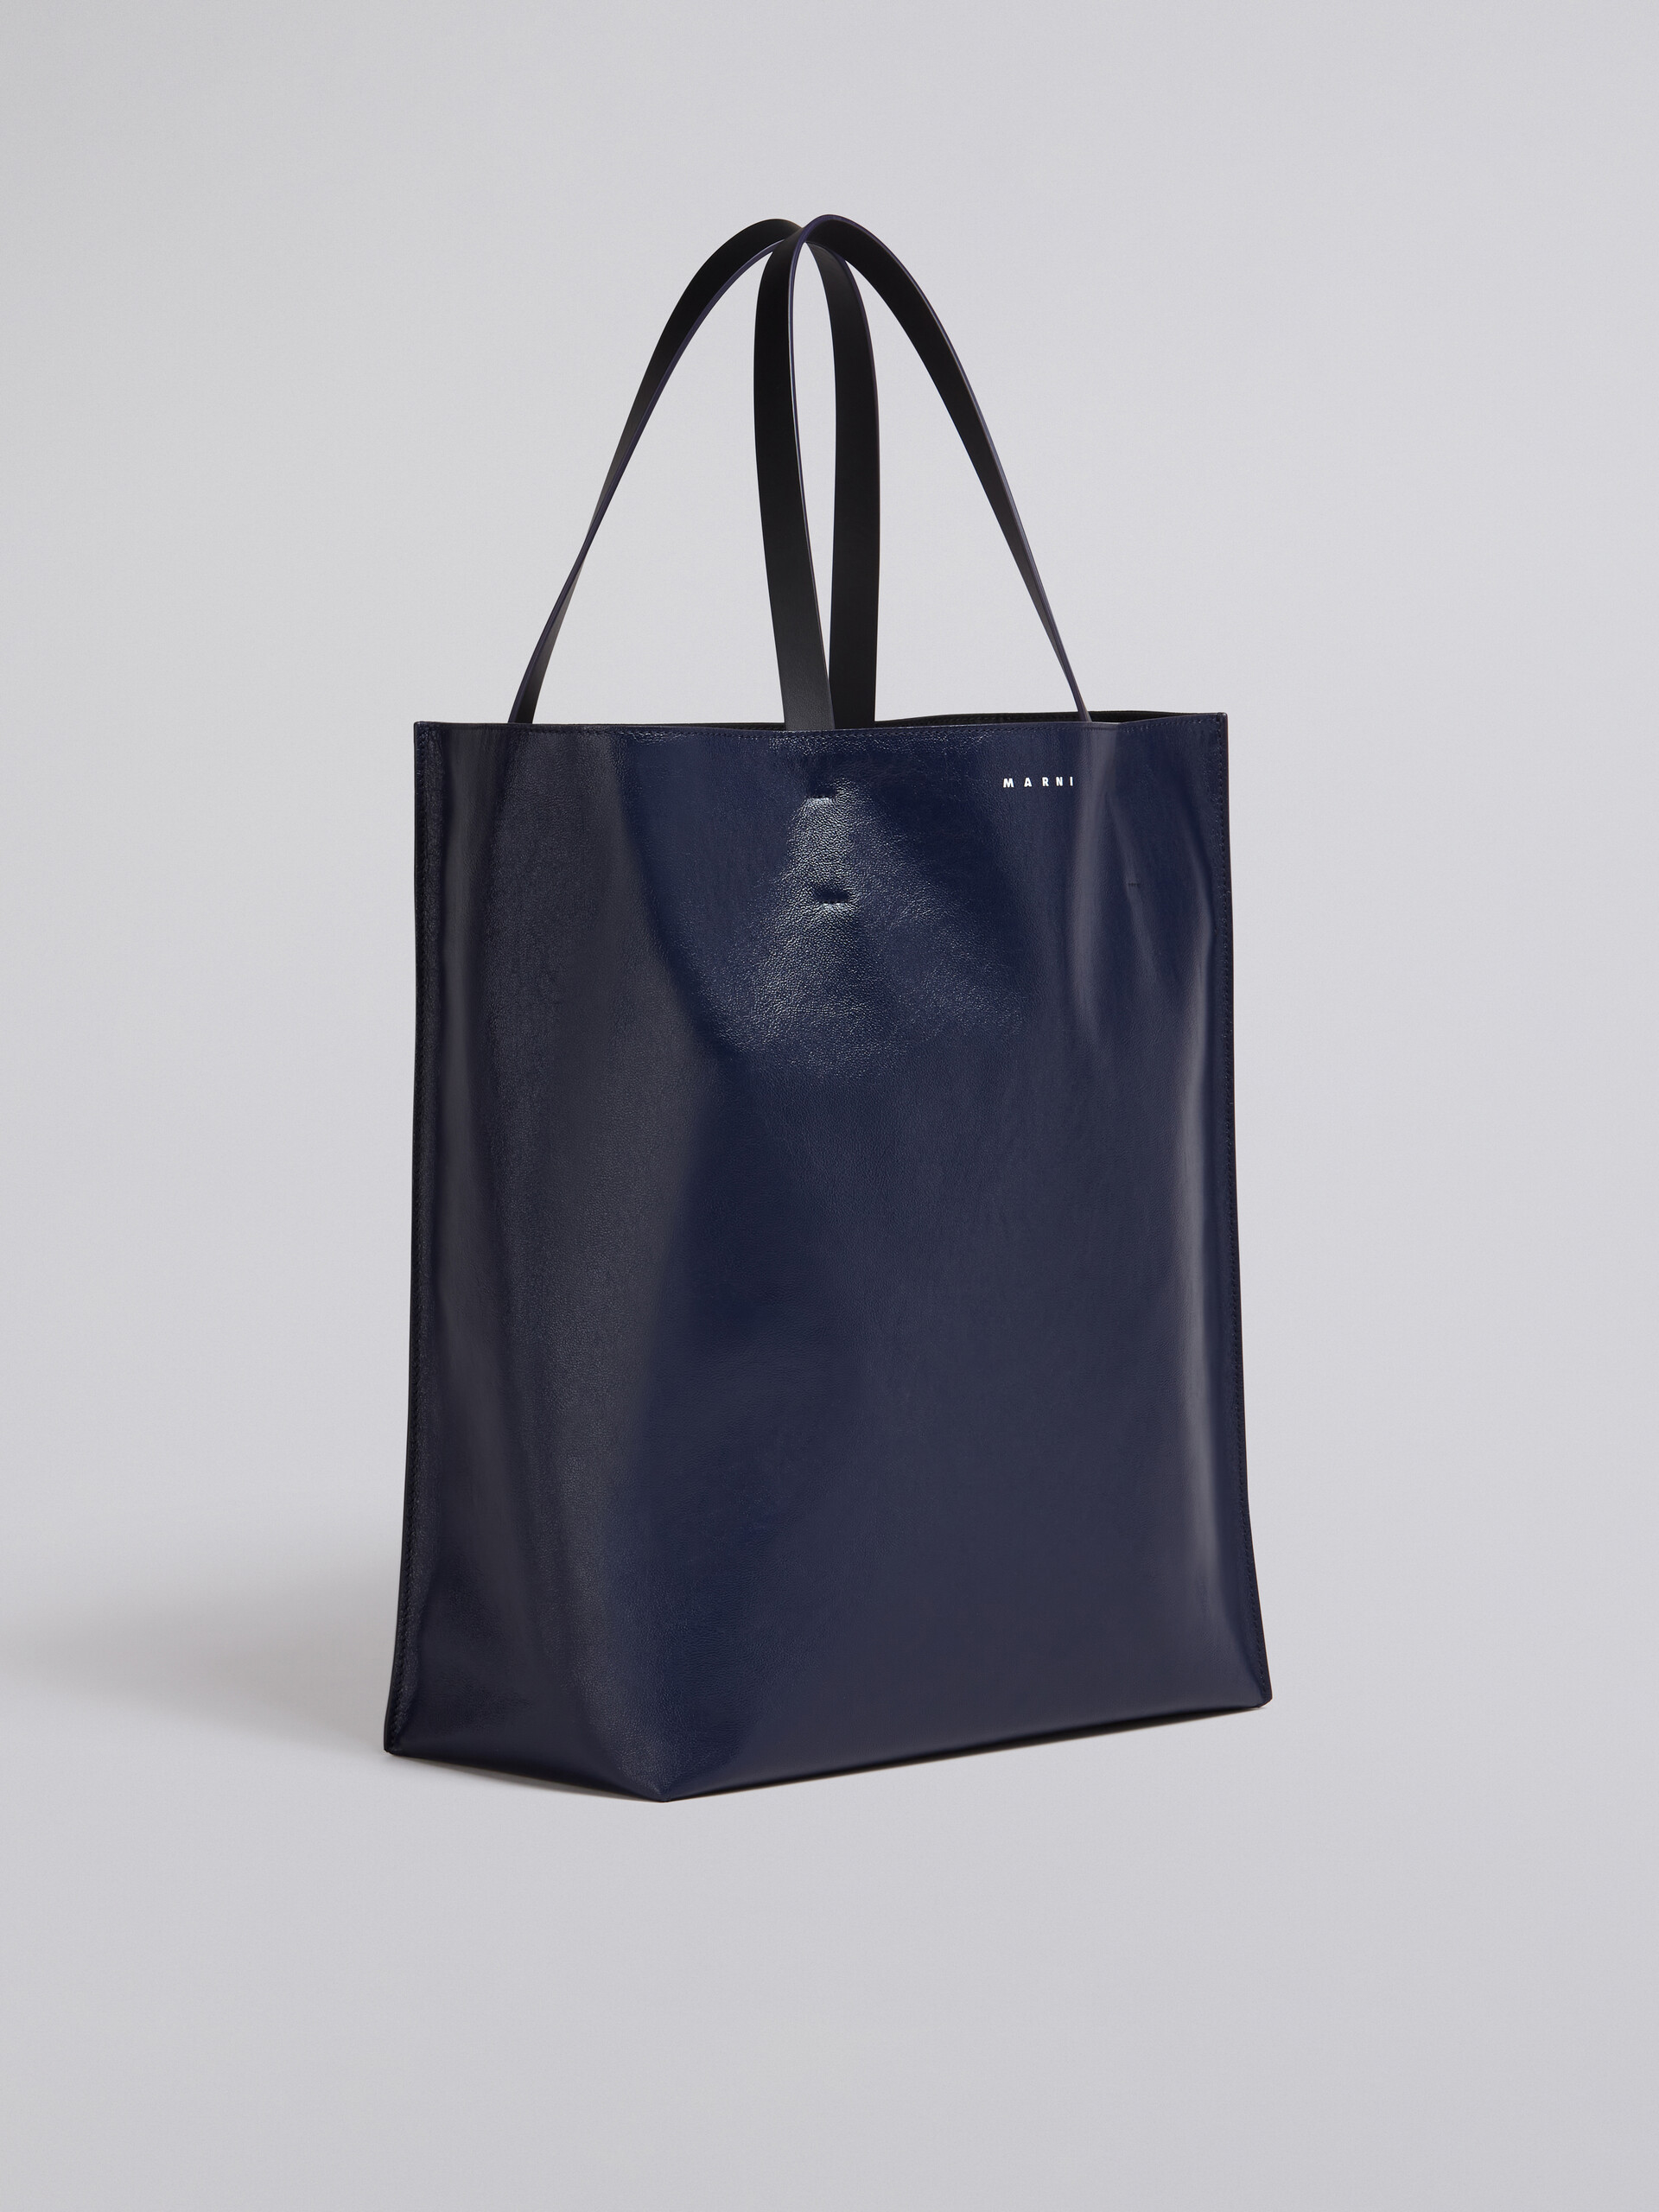 MUSEO SOFT large bag in blue and black shiny leather - Shopping Bags - Image 6